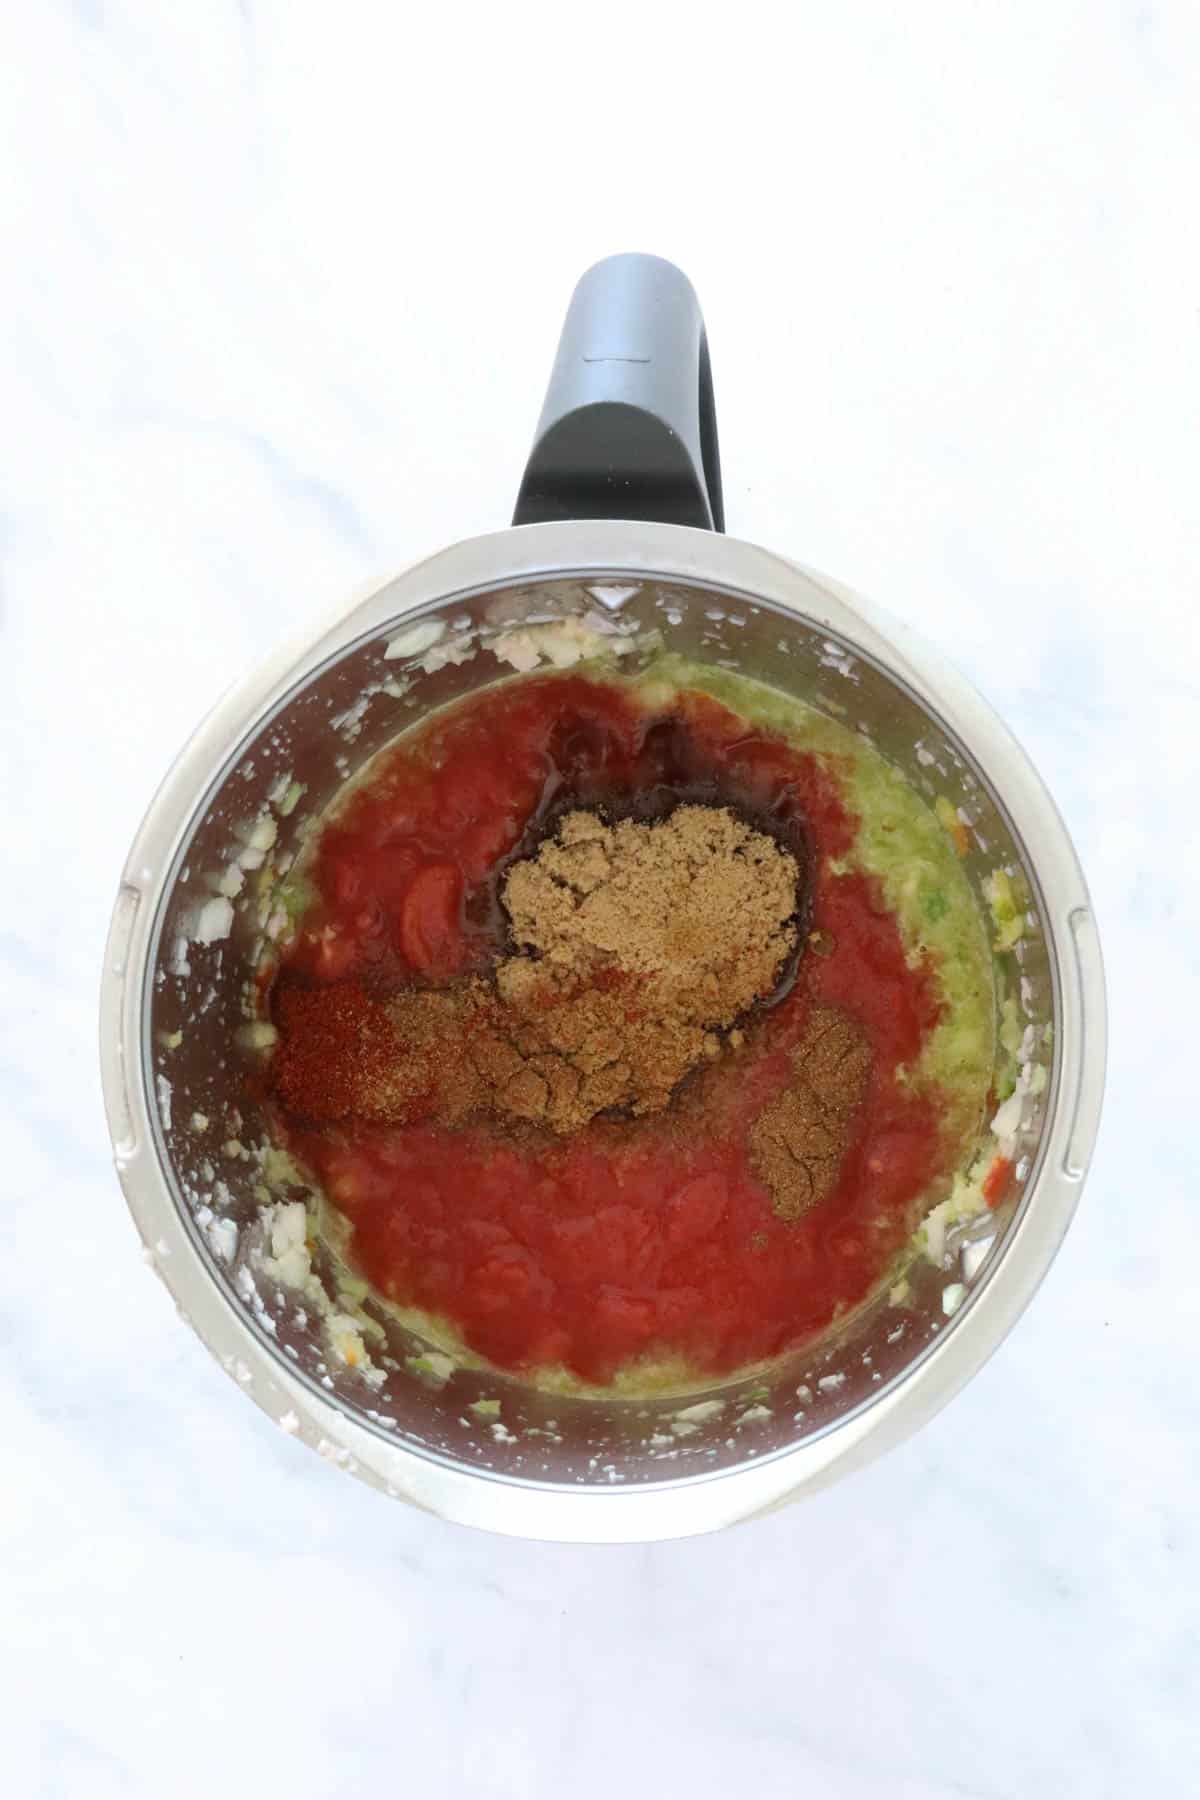 Spices and tomatoes in a Thermomix.